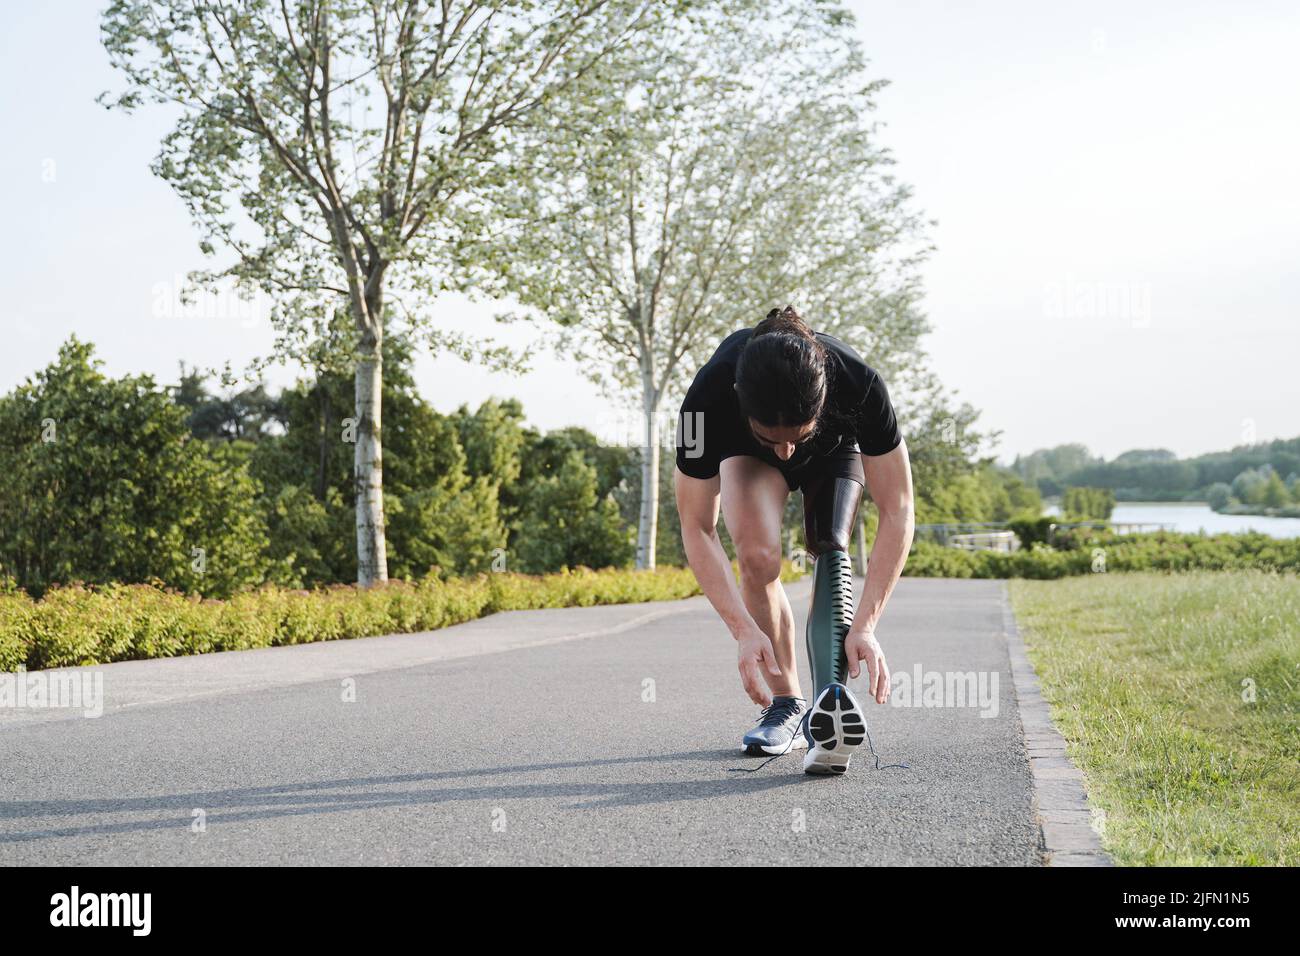 Sport man with physical disability getting ready for training routine outdoor - Focus on prosthetic leg Stock Photo